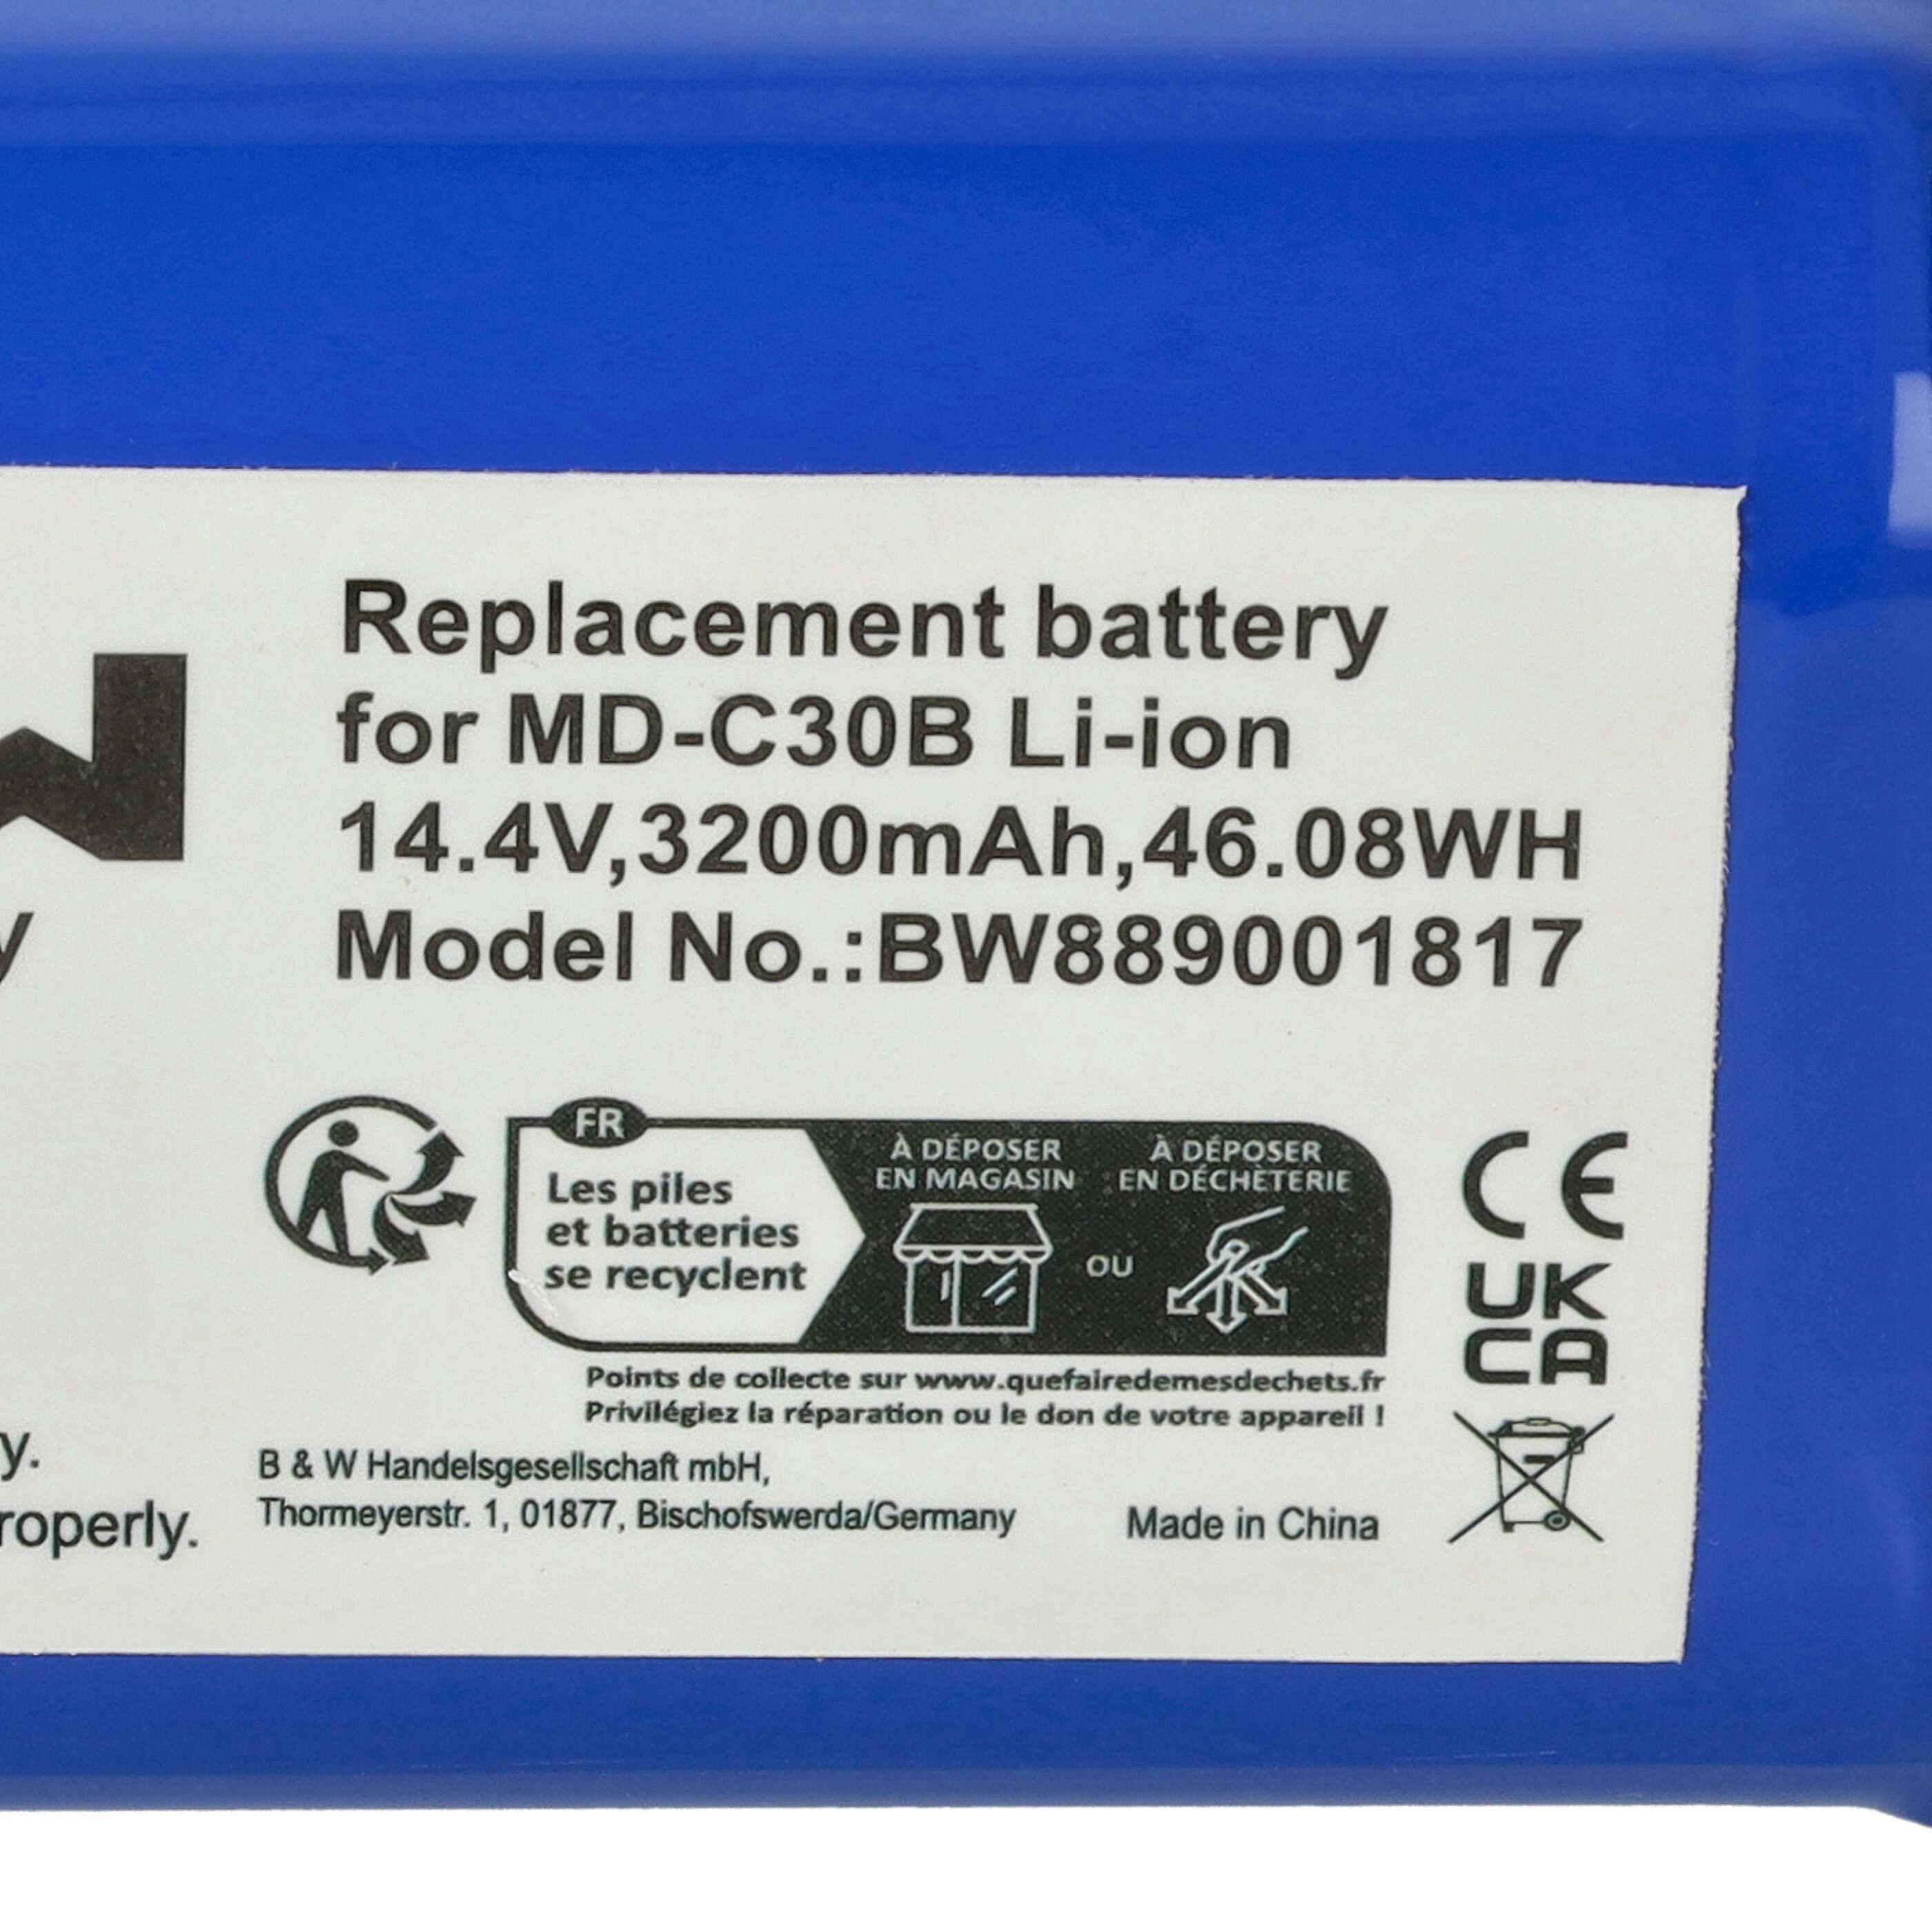 Battery Replacement for Blaupunkt 6.60.40.02-0, D071-INR-CH-4S1P for - 3200mAh, 14.4V, Li-Ion